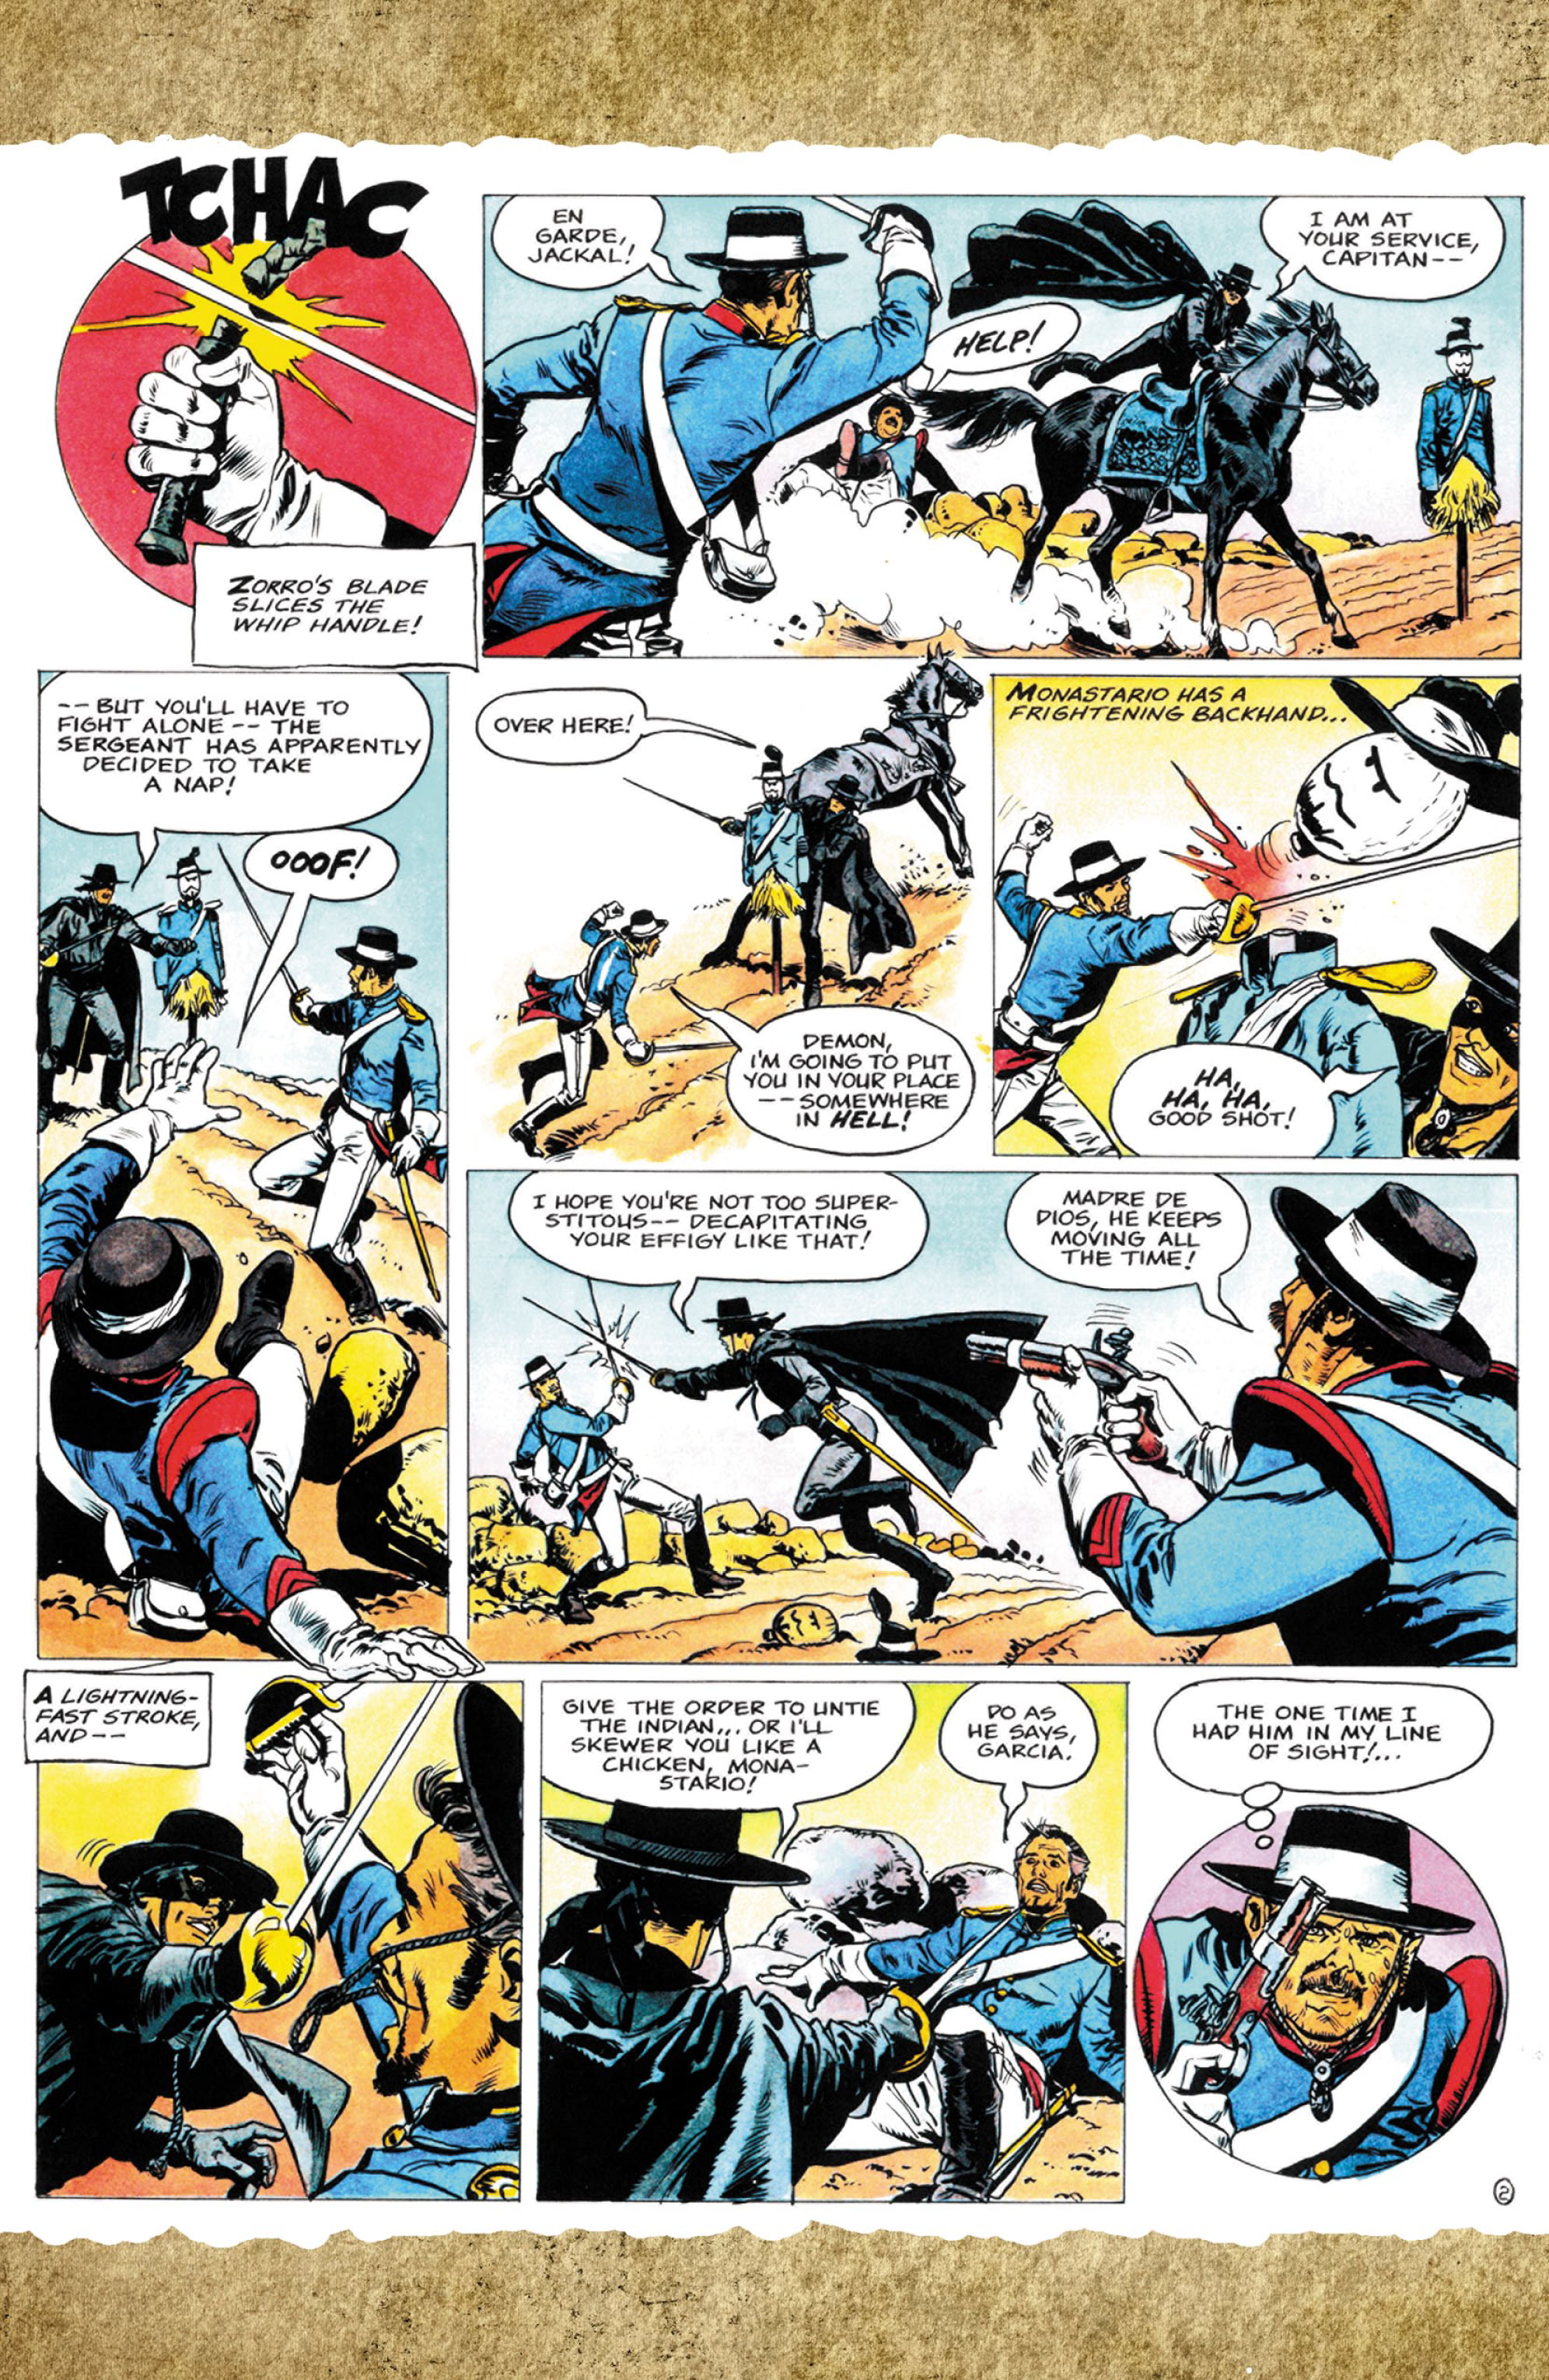 Zorro Timeless Tales (2020-): Chapter 2 - Page 4